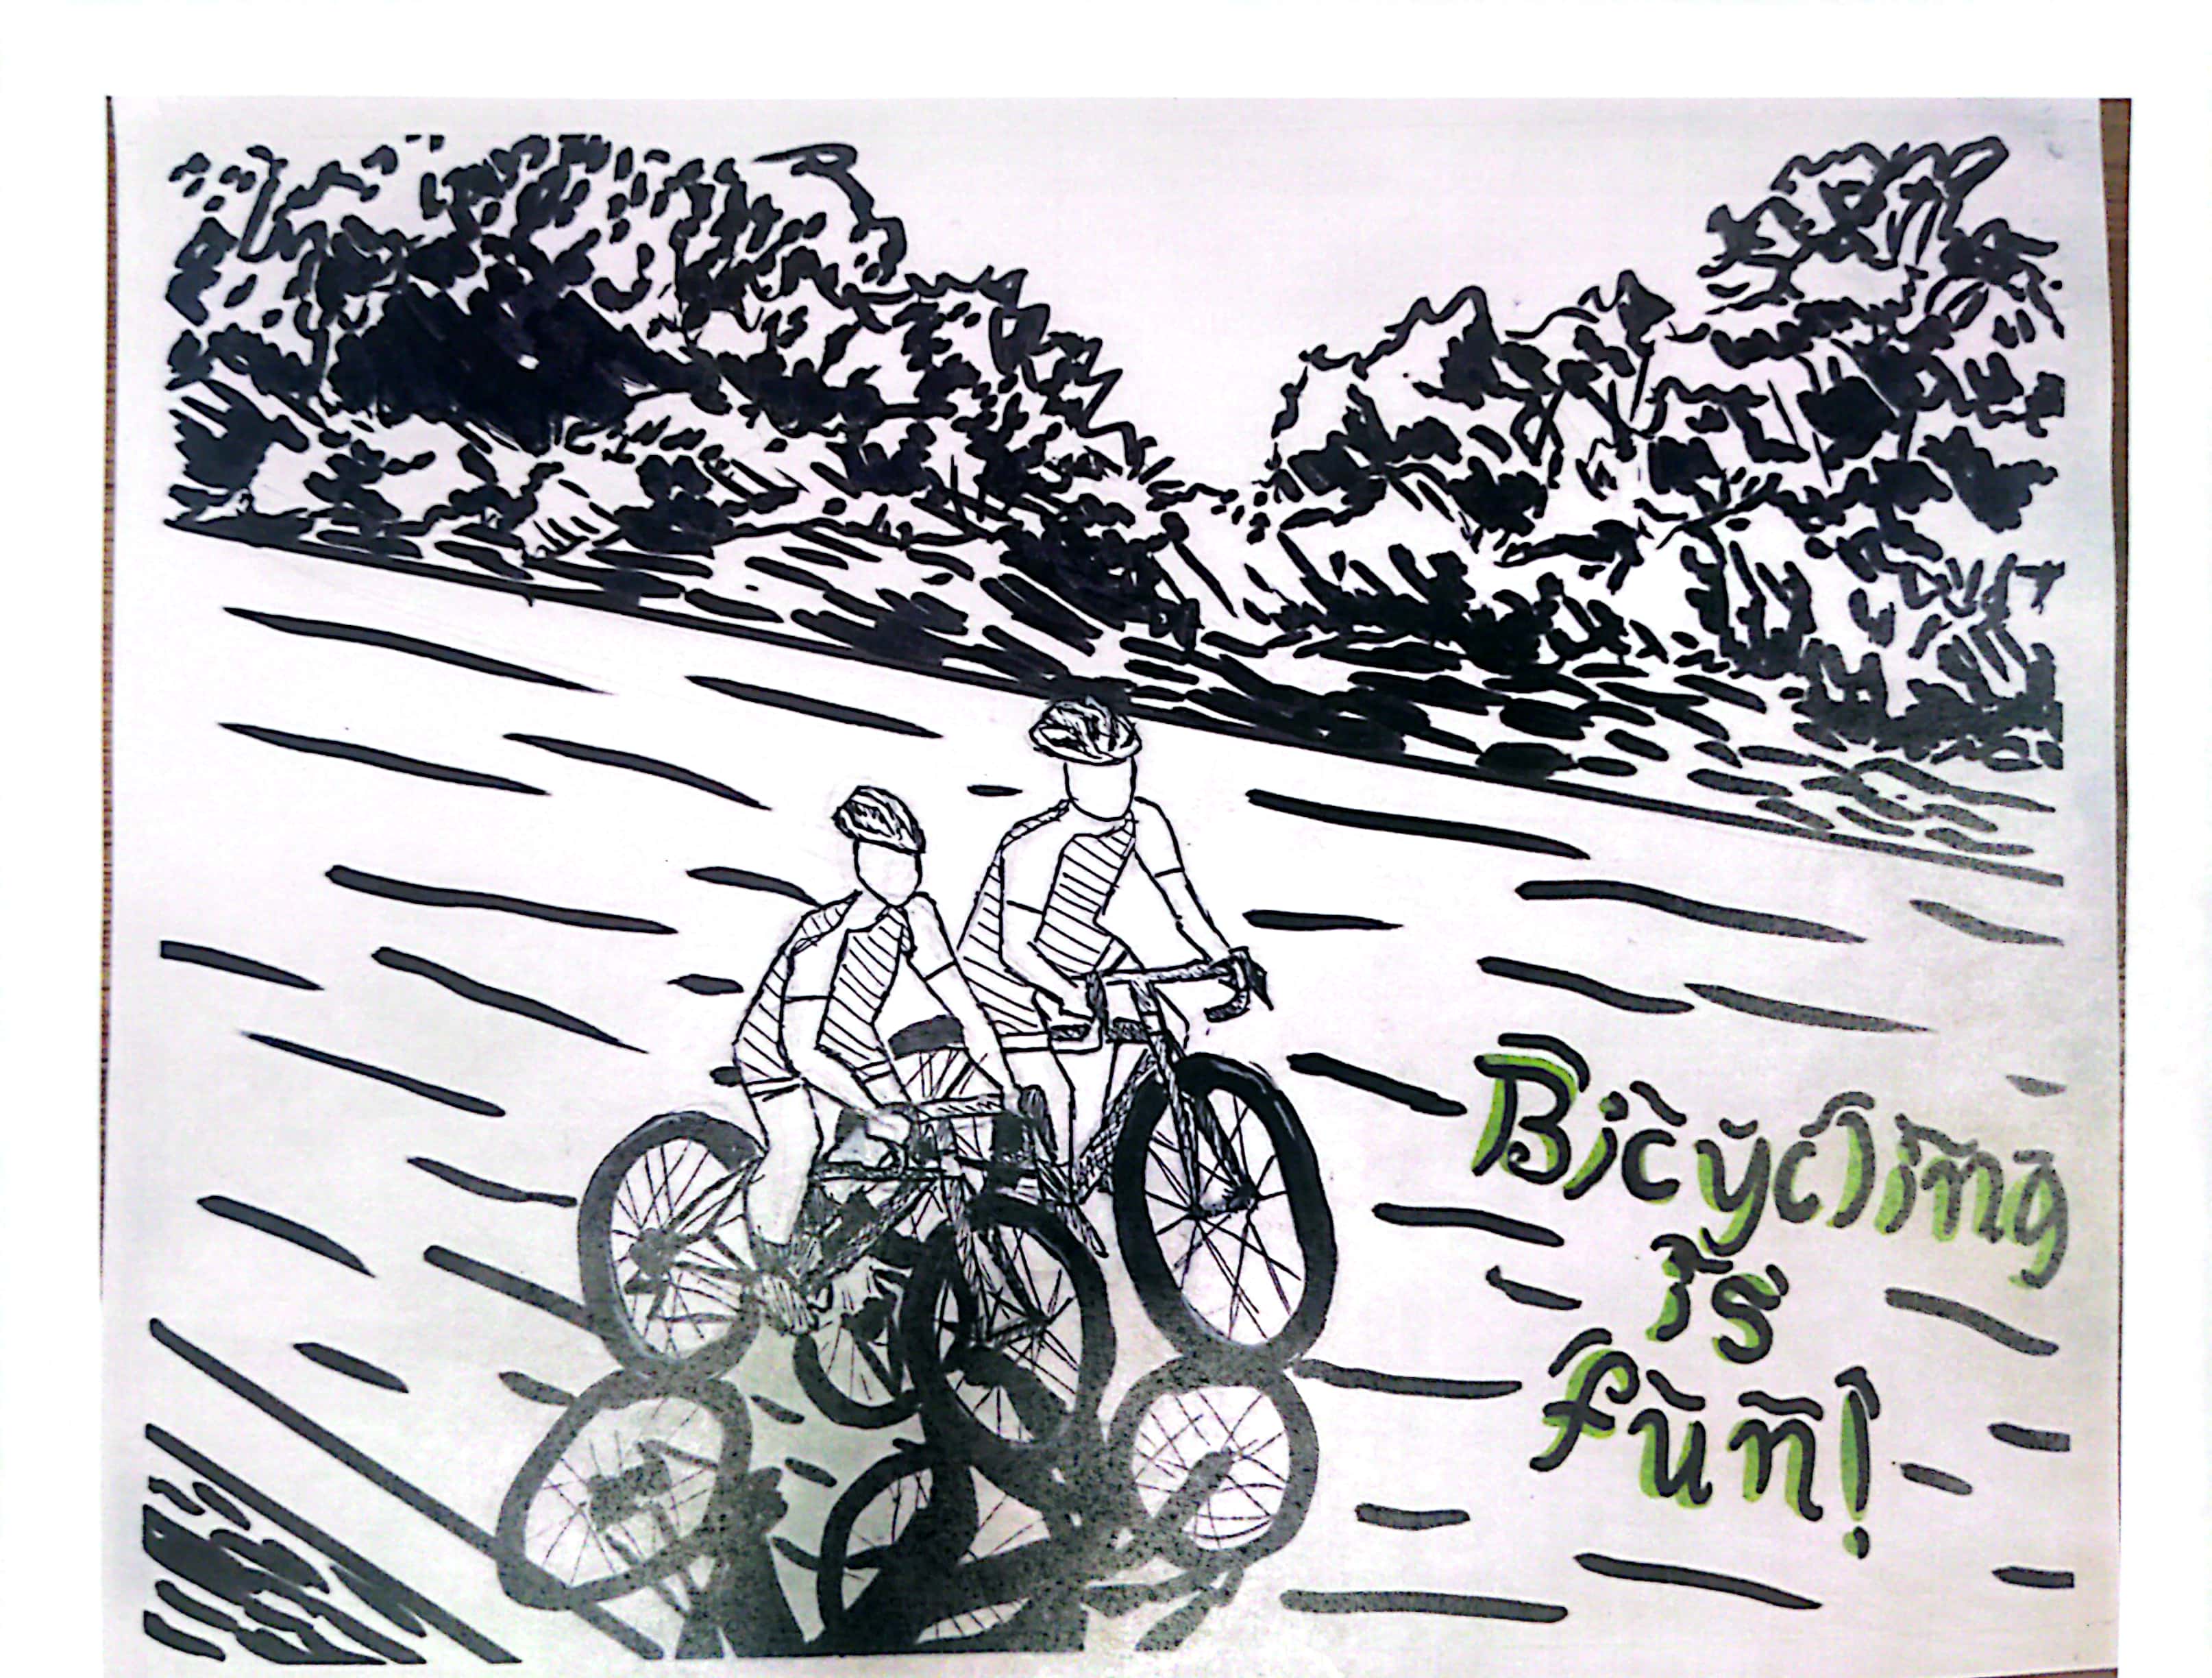 Student artwork in black ink on white paper, showing two bikers in helmets riding on a path lined with lush trees and shrubs. Title 